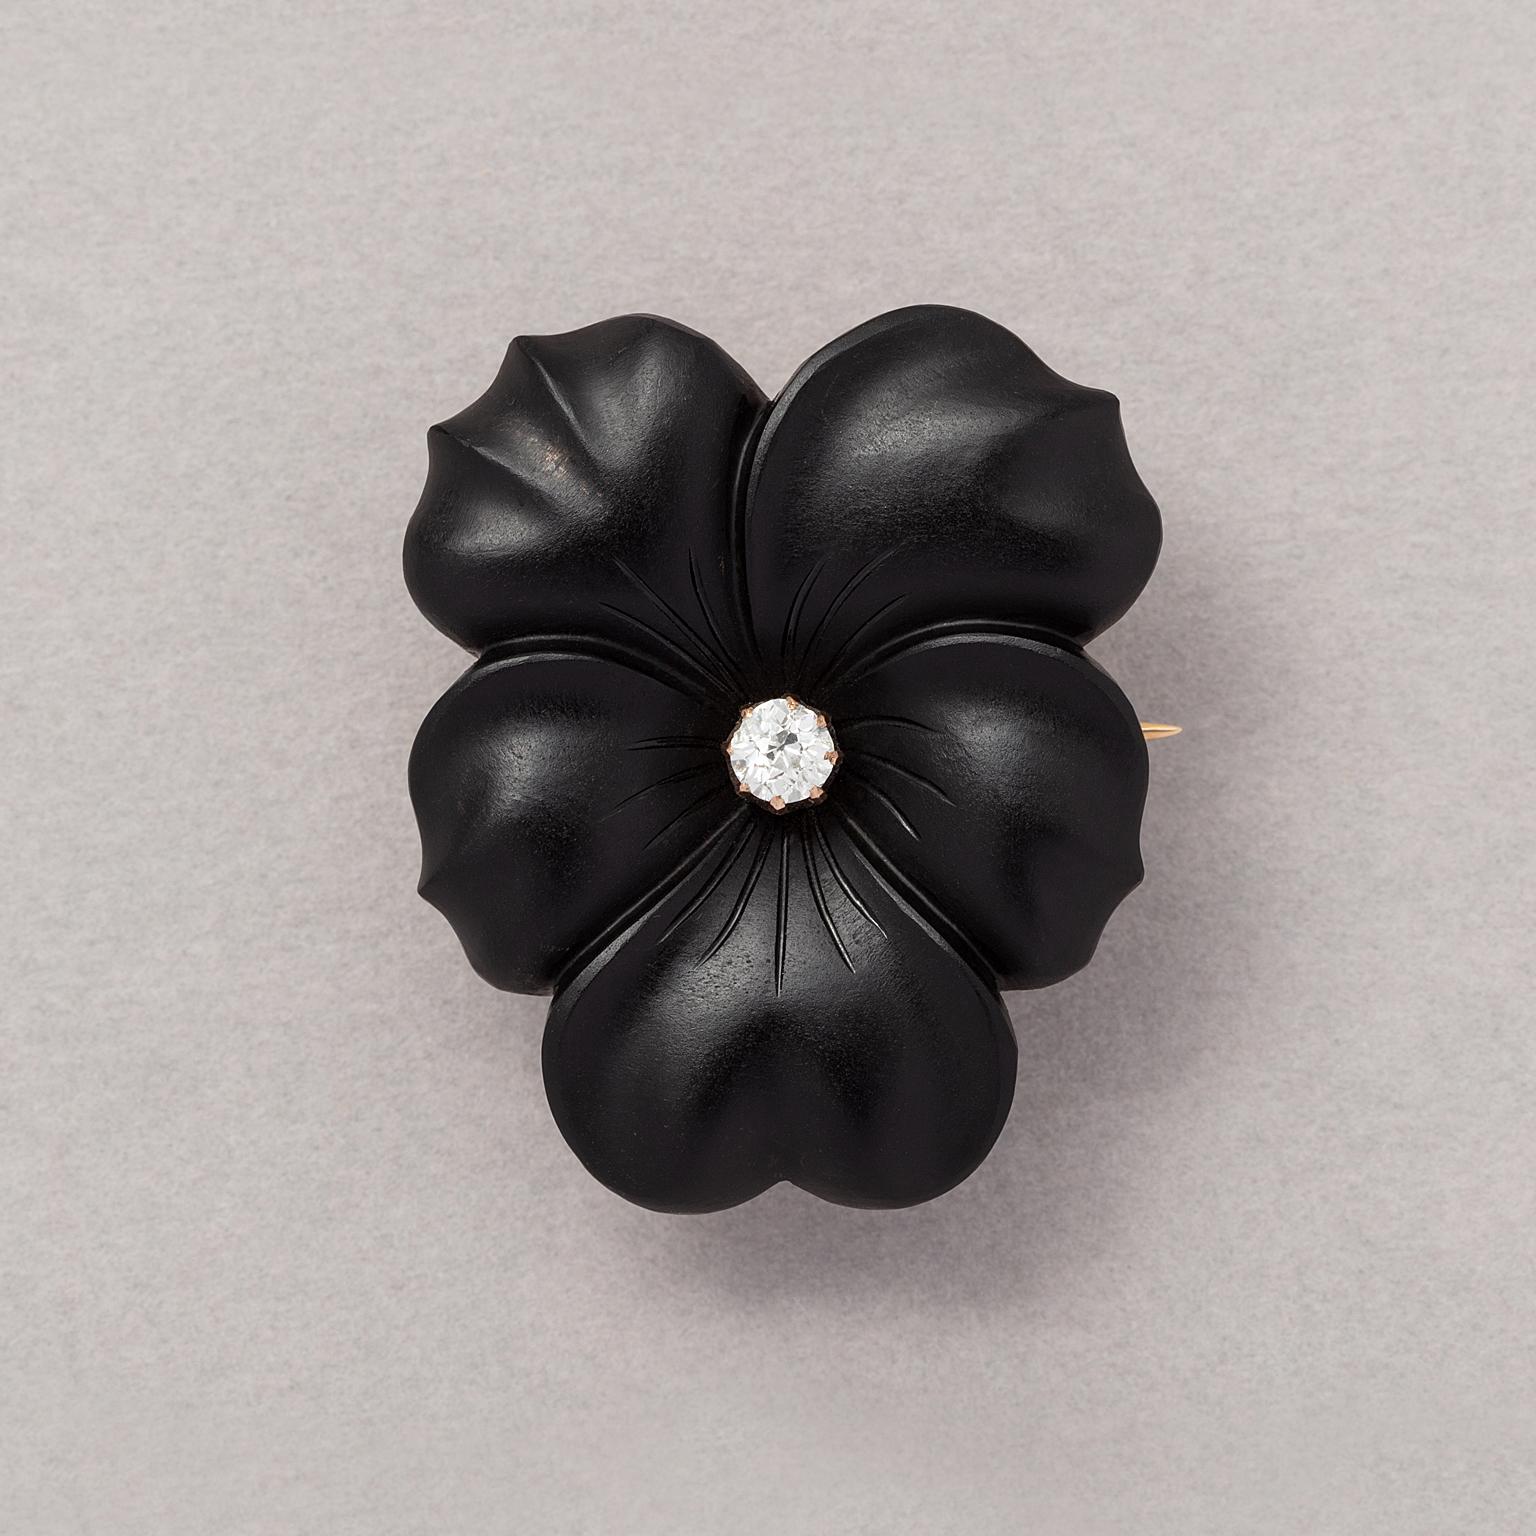 A brooch in the shape of a pansy with a 14 carat gold mounting (and with a metal safety clasp), the flower has been carved from one piece of onyx and is set in the heart with an old cut diamond, circa 1900-1910.

weight: 8.88 grams
dimensions: 3.2 x